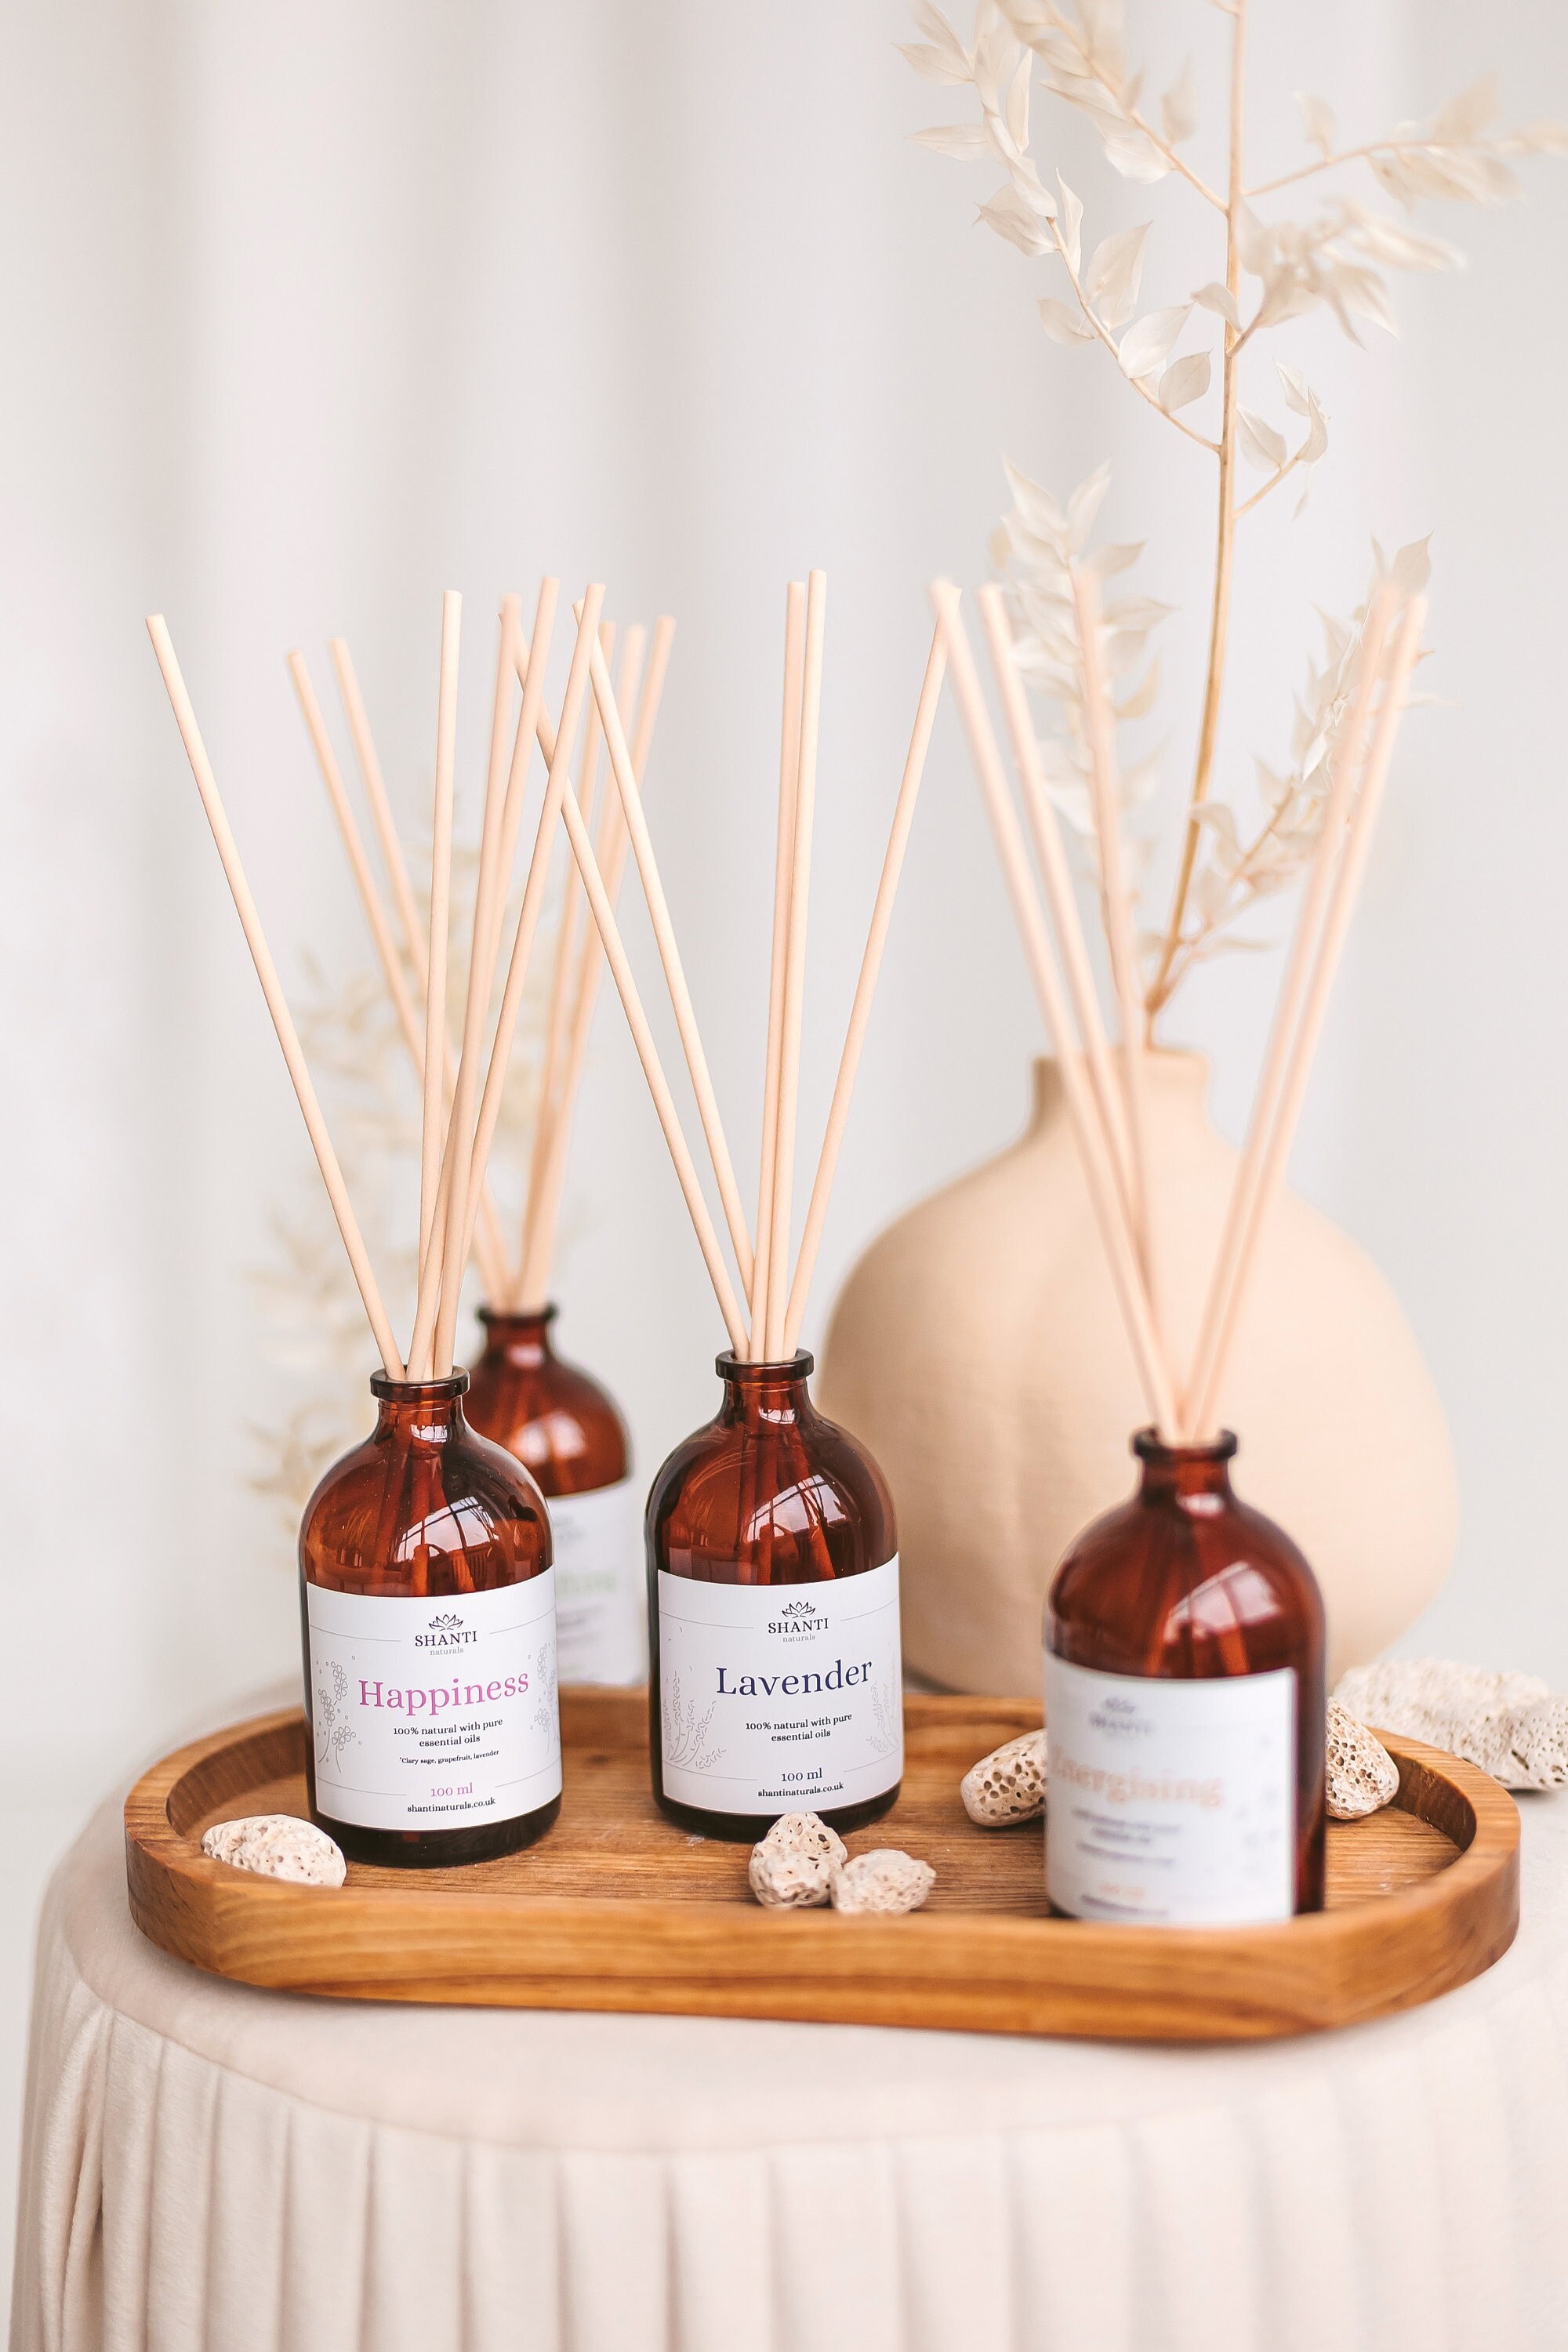 Uplifting Reed Diffuser Scented With Lemongrass Grapefruit - Etsy UK